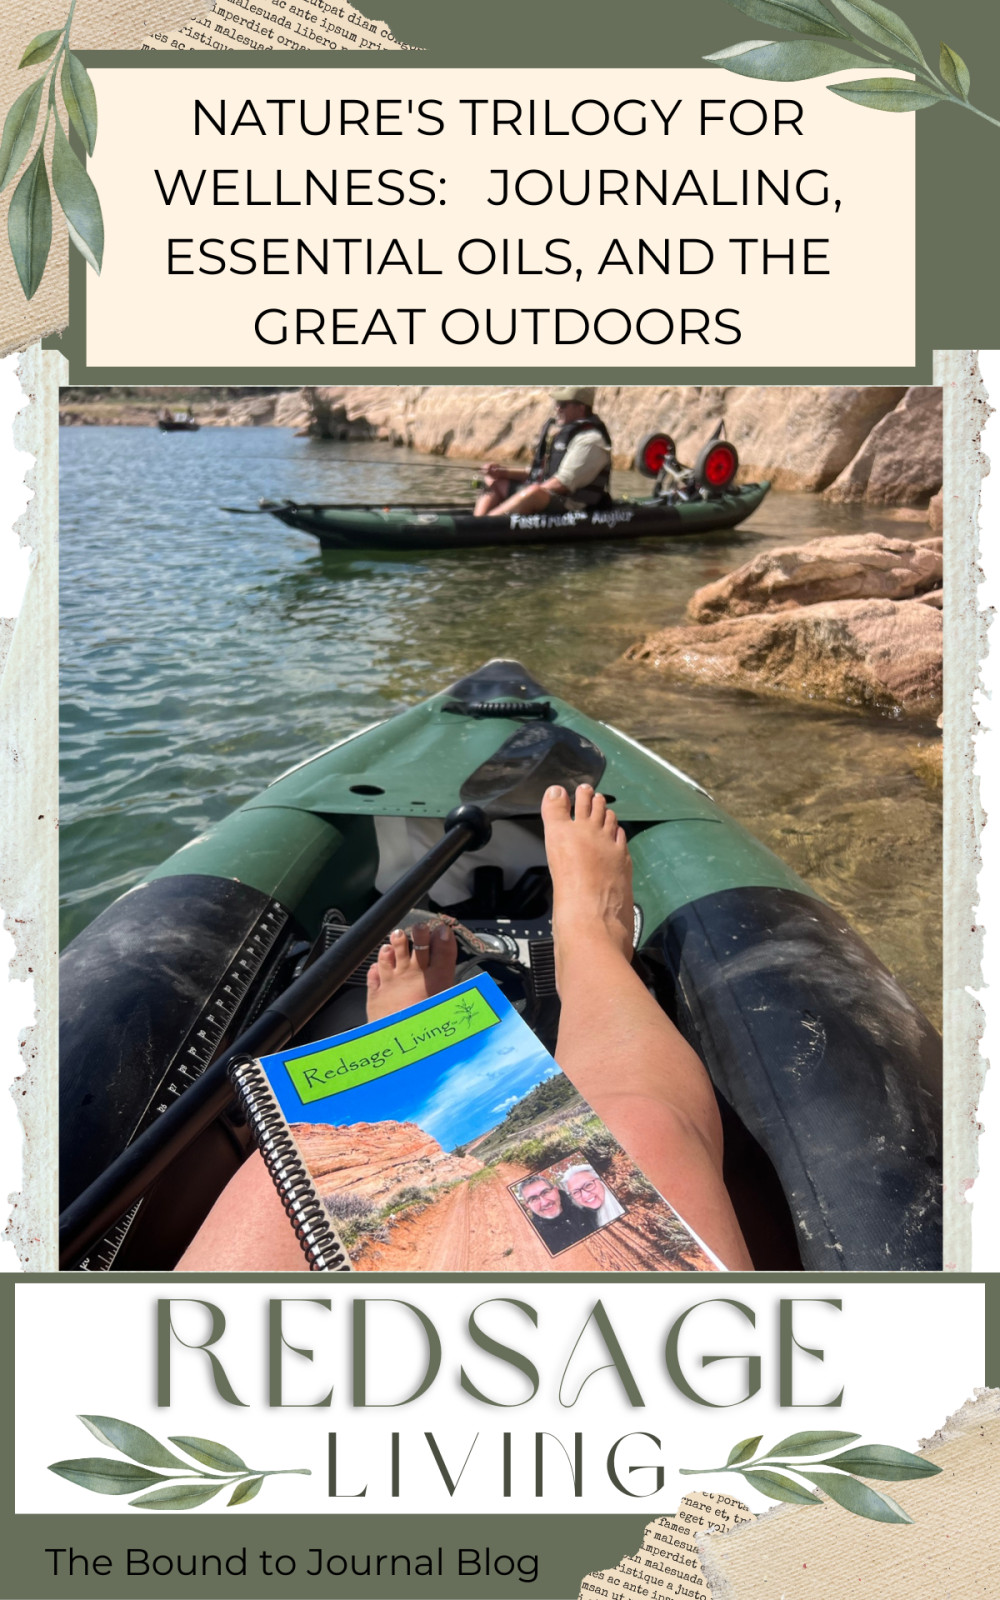 Nature's Trilogy for Wellness: Journaling, Essential OIls, and the Great Outdoors